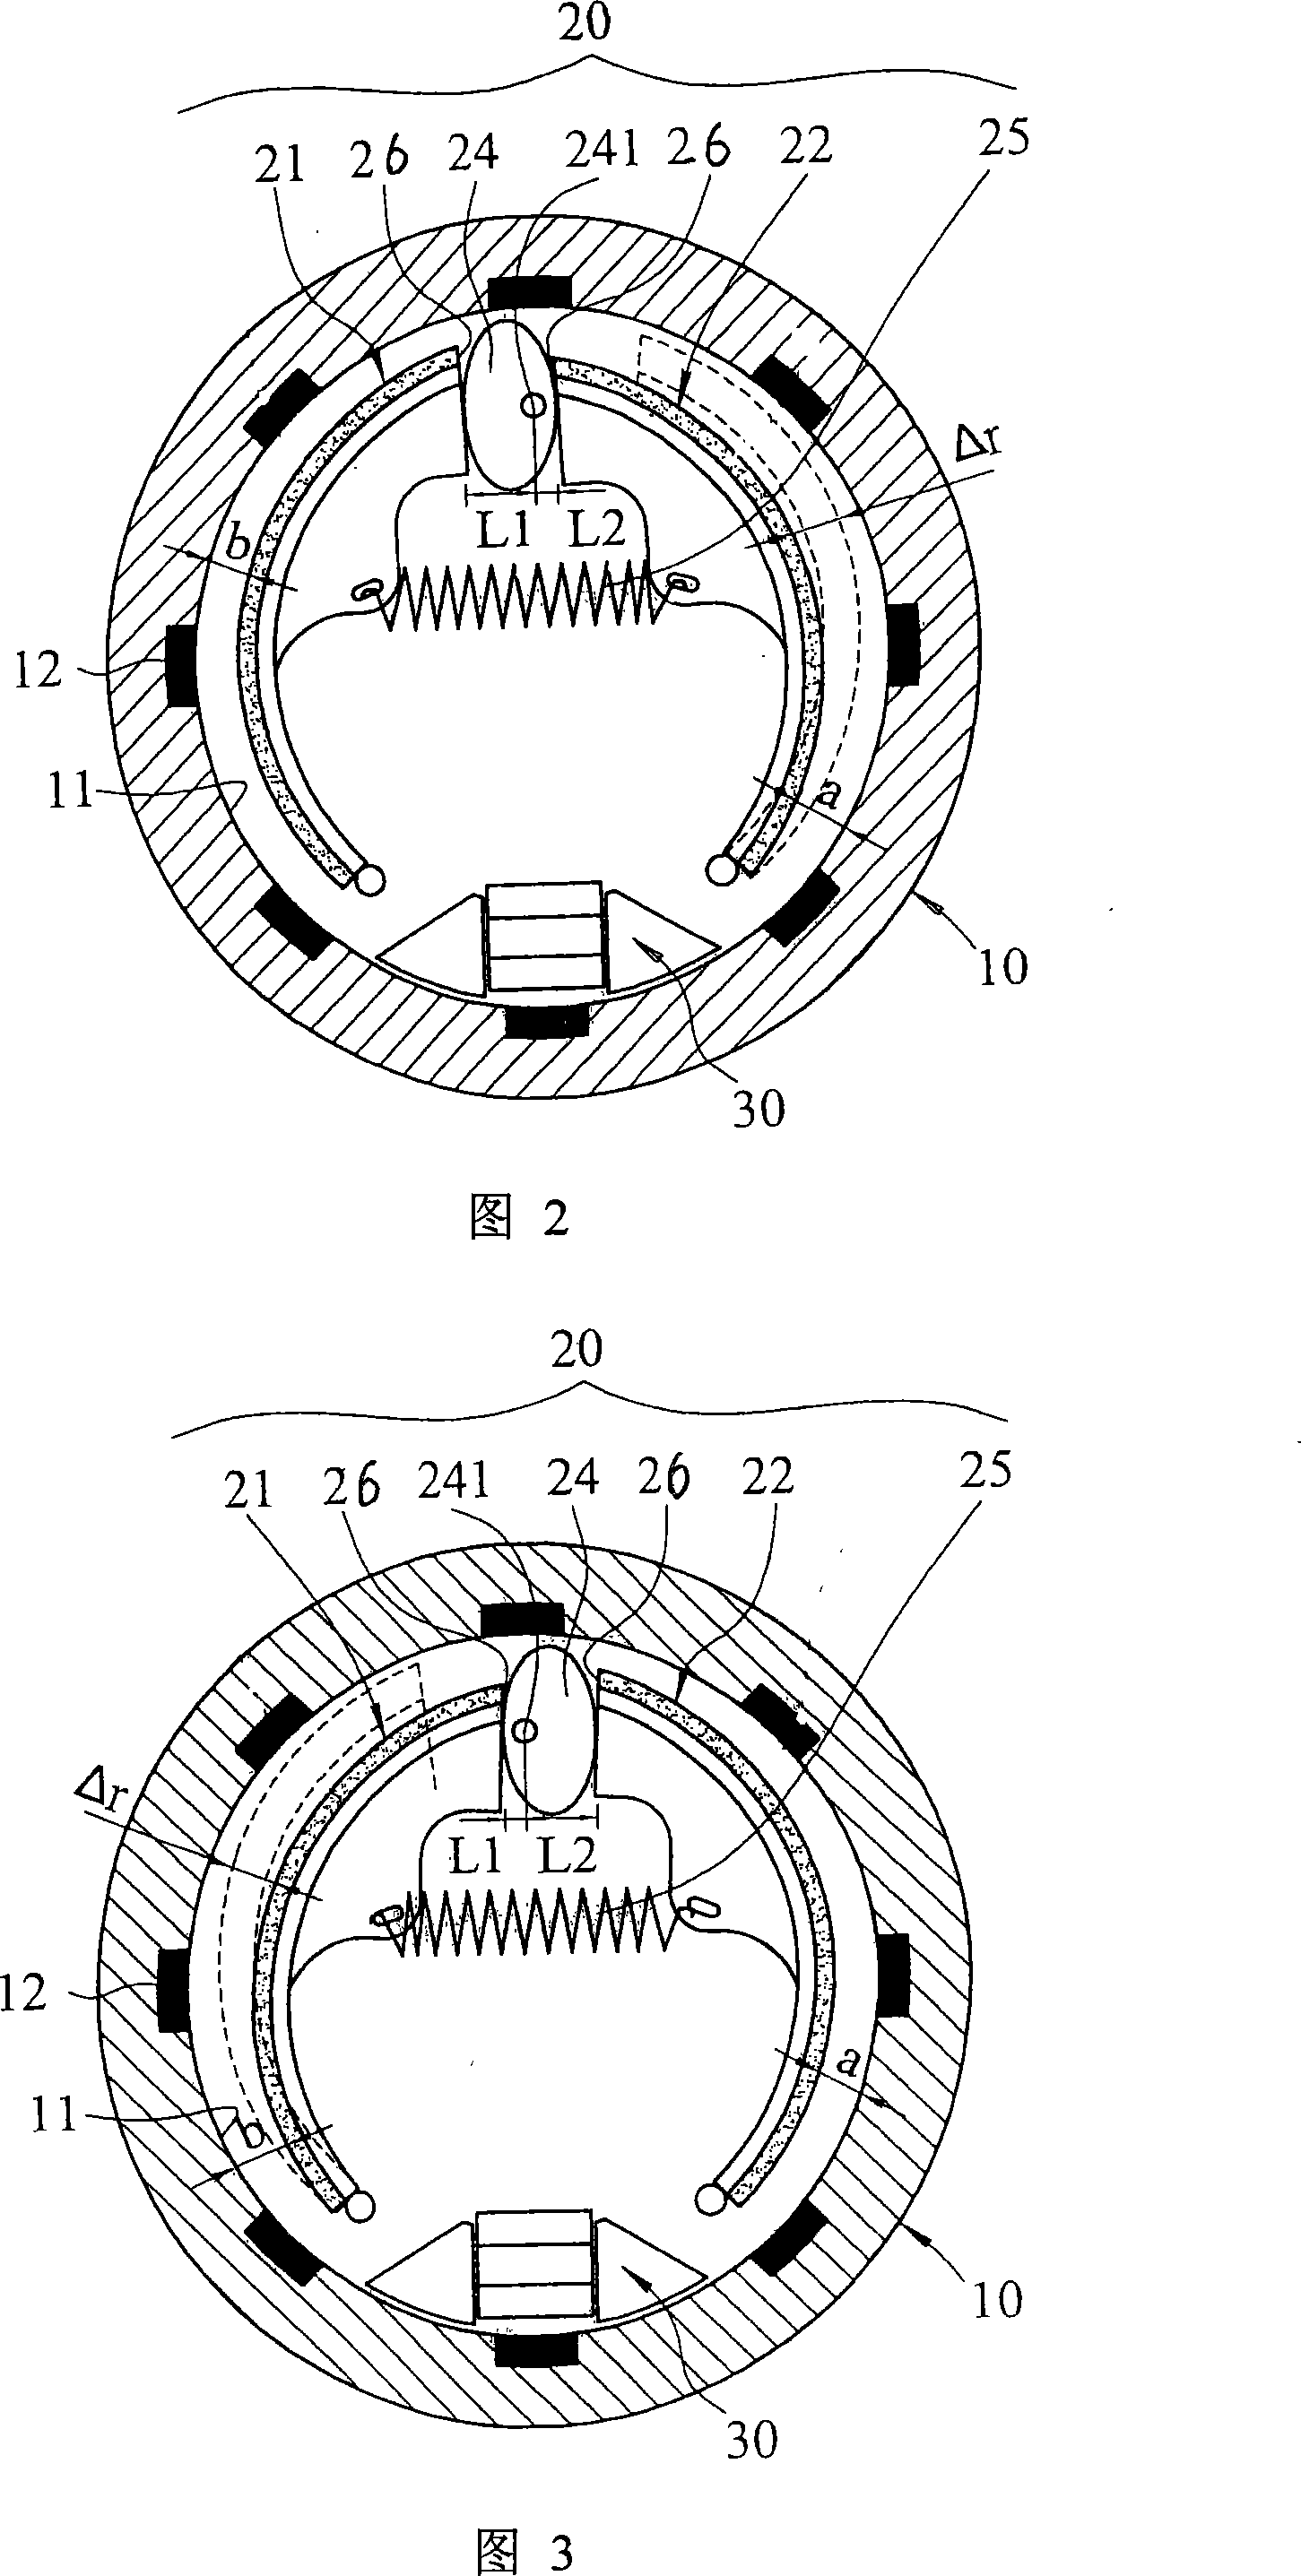 Section speed reducing magnetic control system for sports appliance